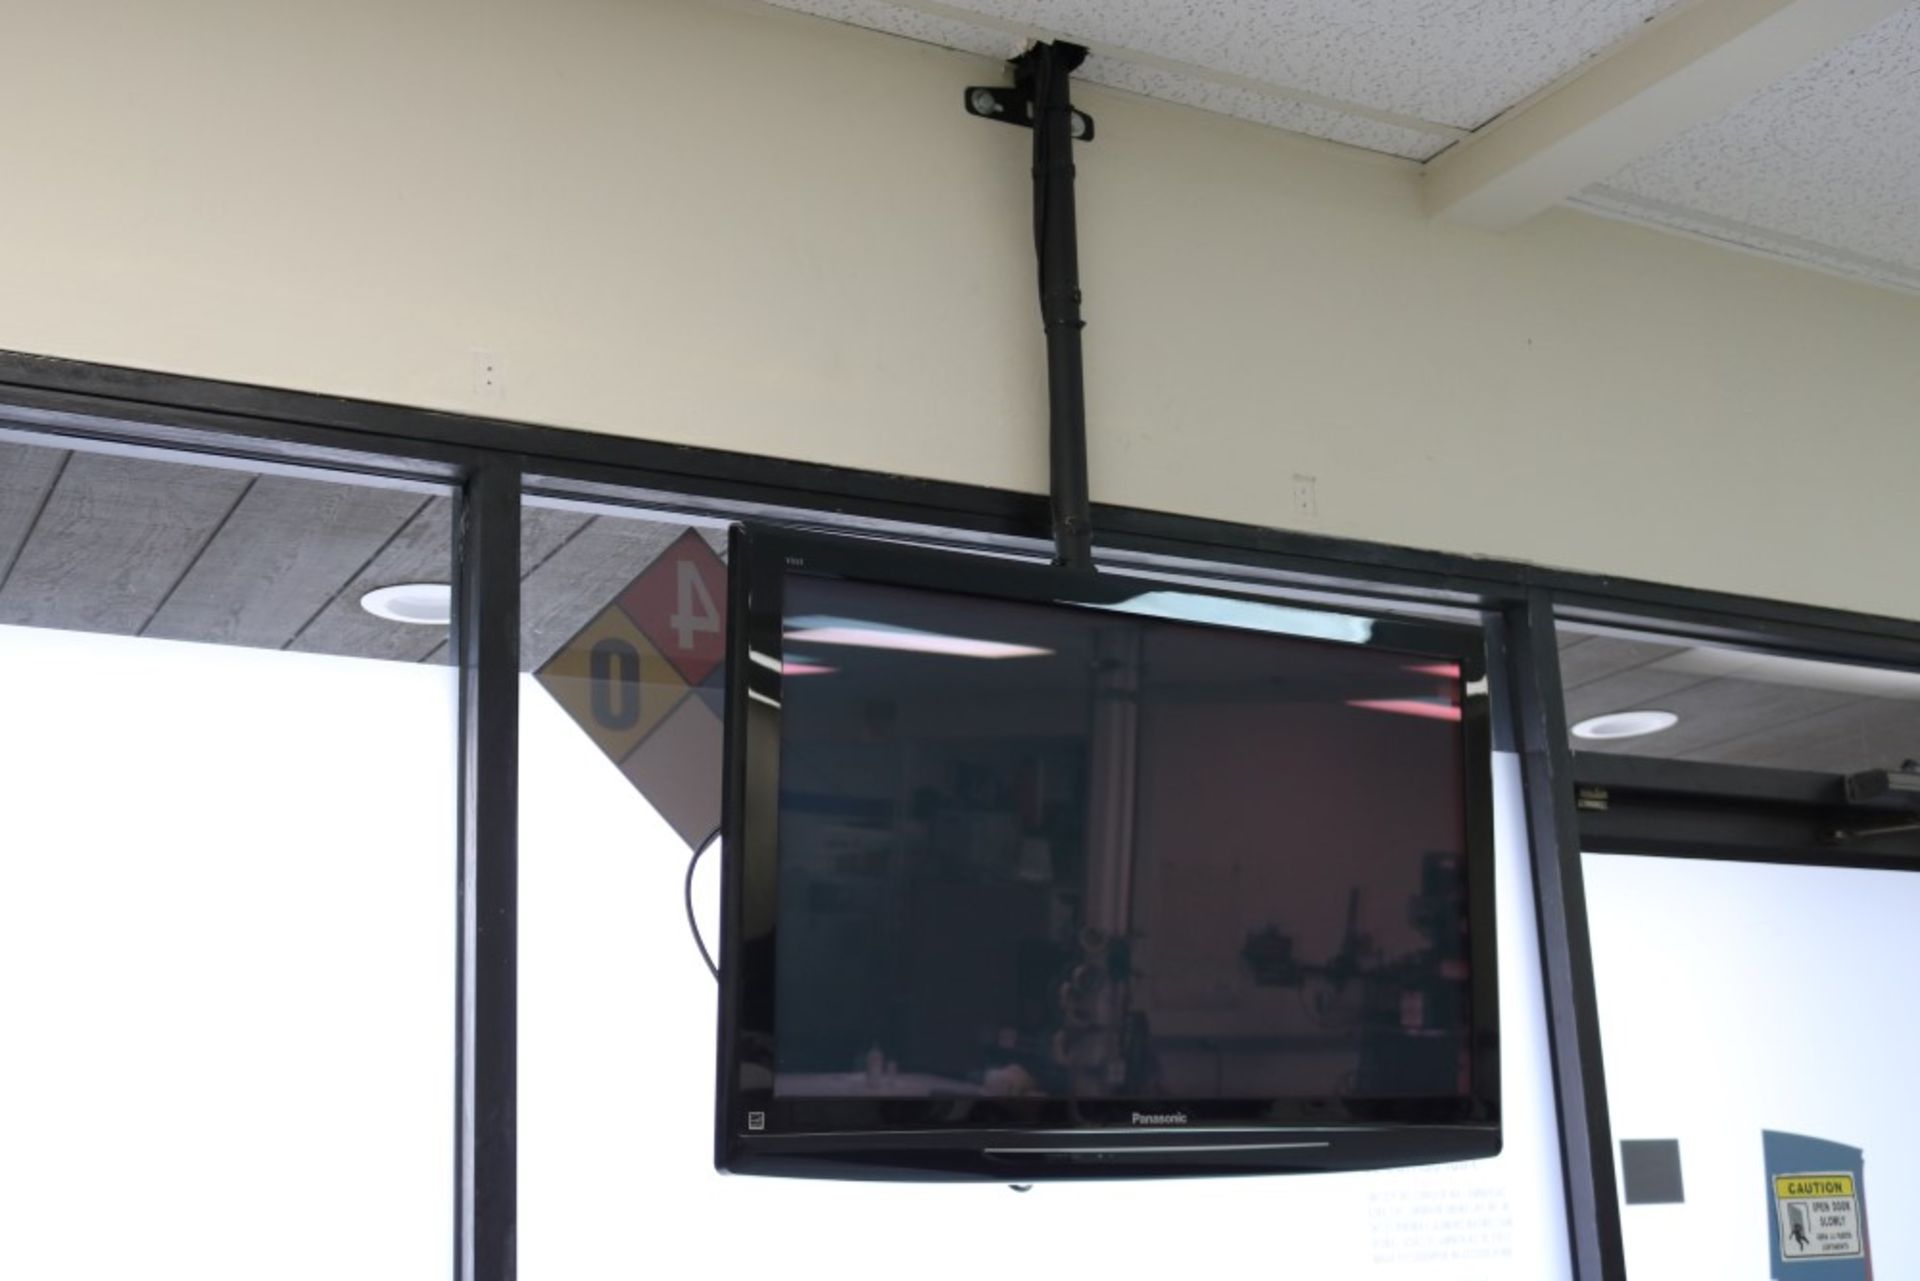 48" Panasonic Viera with Seneca Wifi Casting System and Drop Arm Ceiling Mount